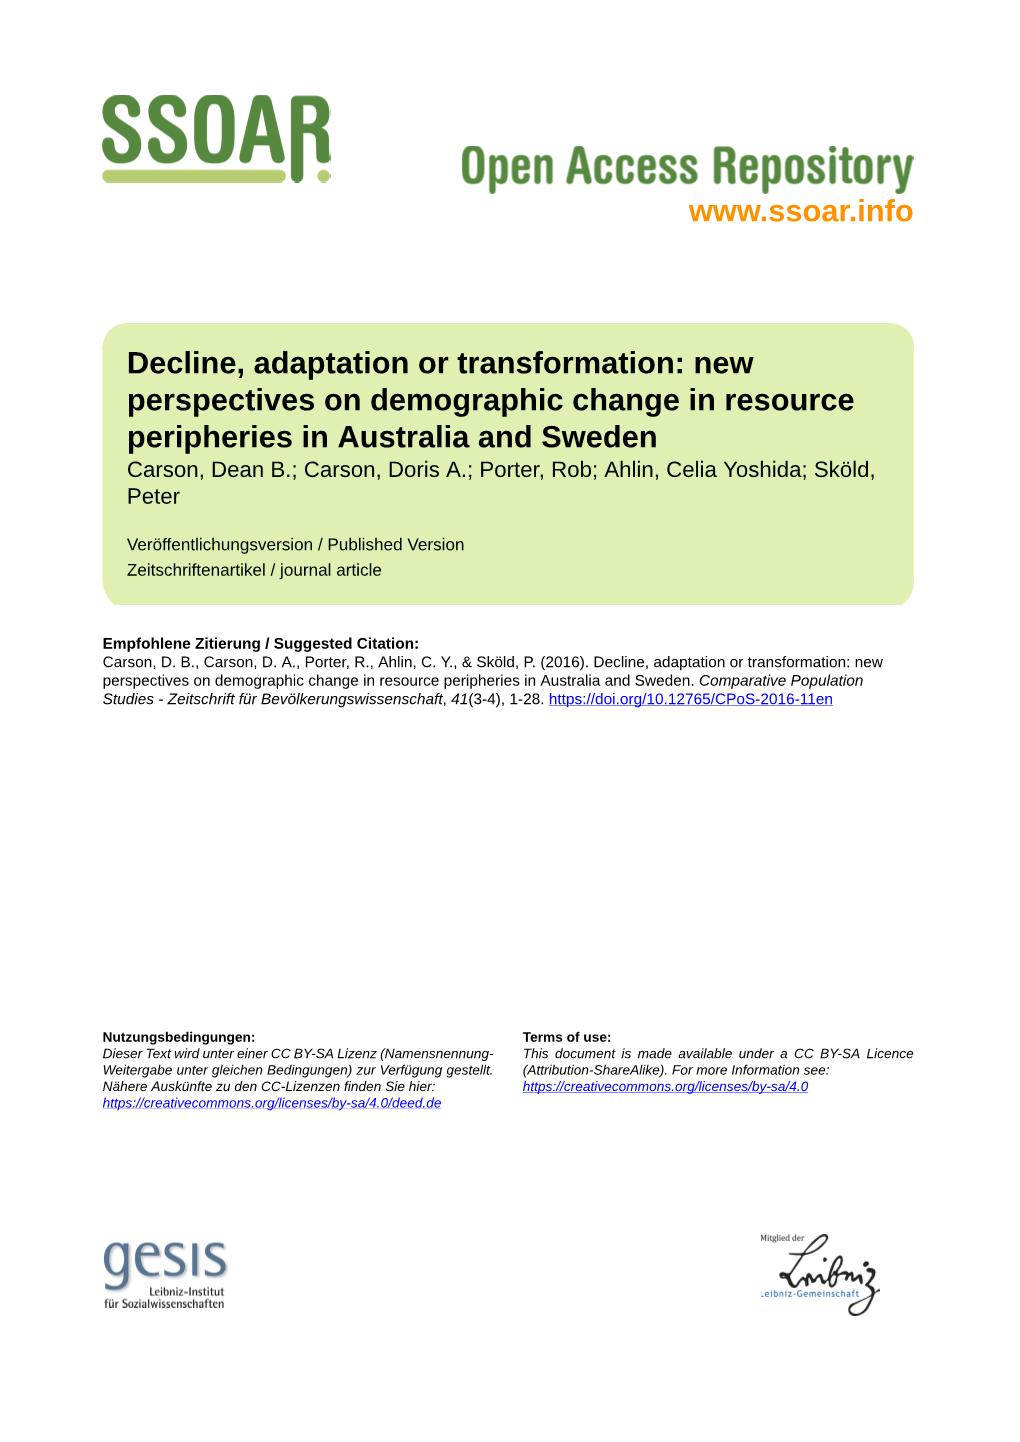 New Perspectives on Demographic Change in Resource Peripheries In